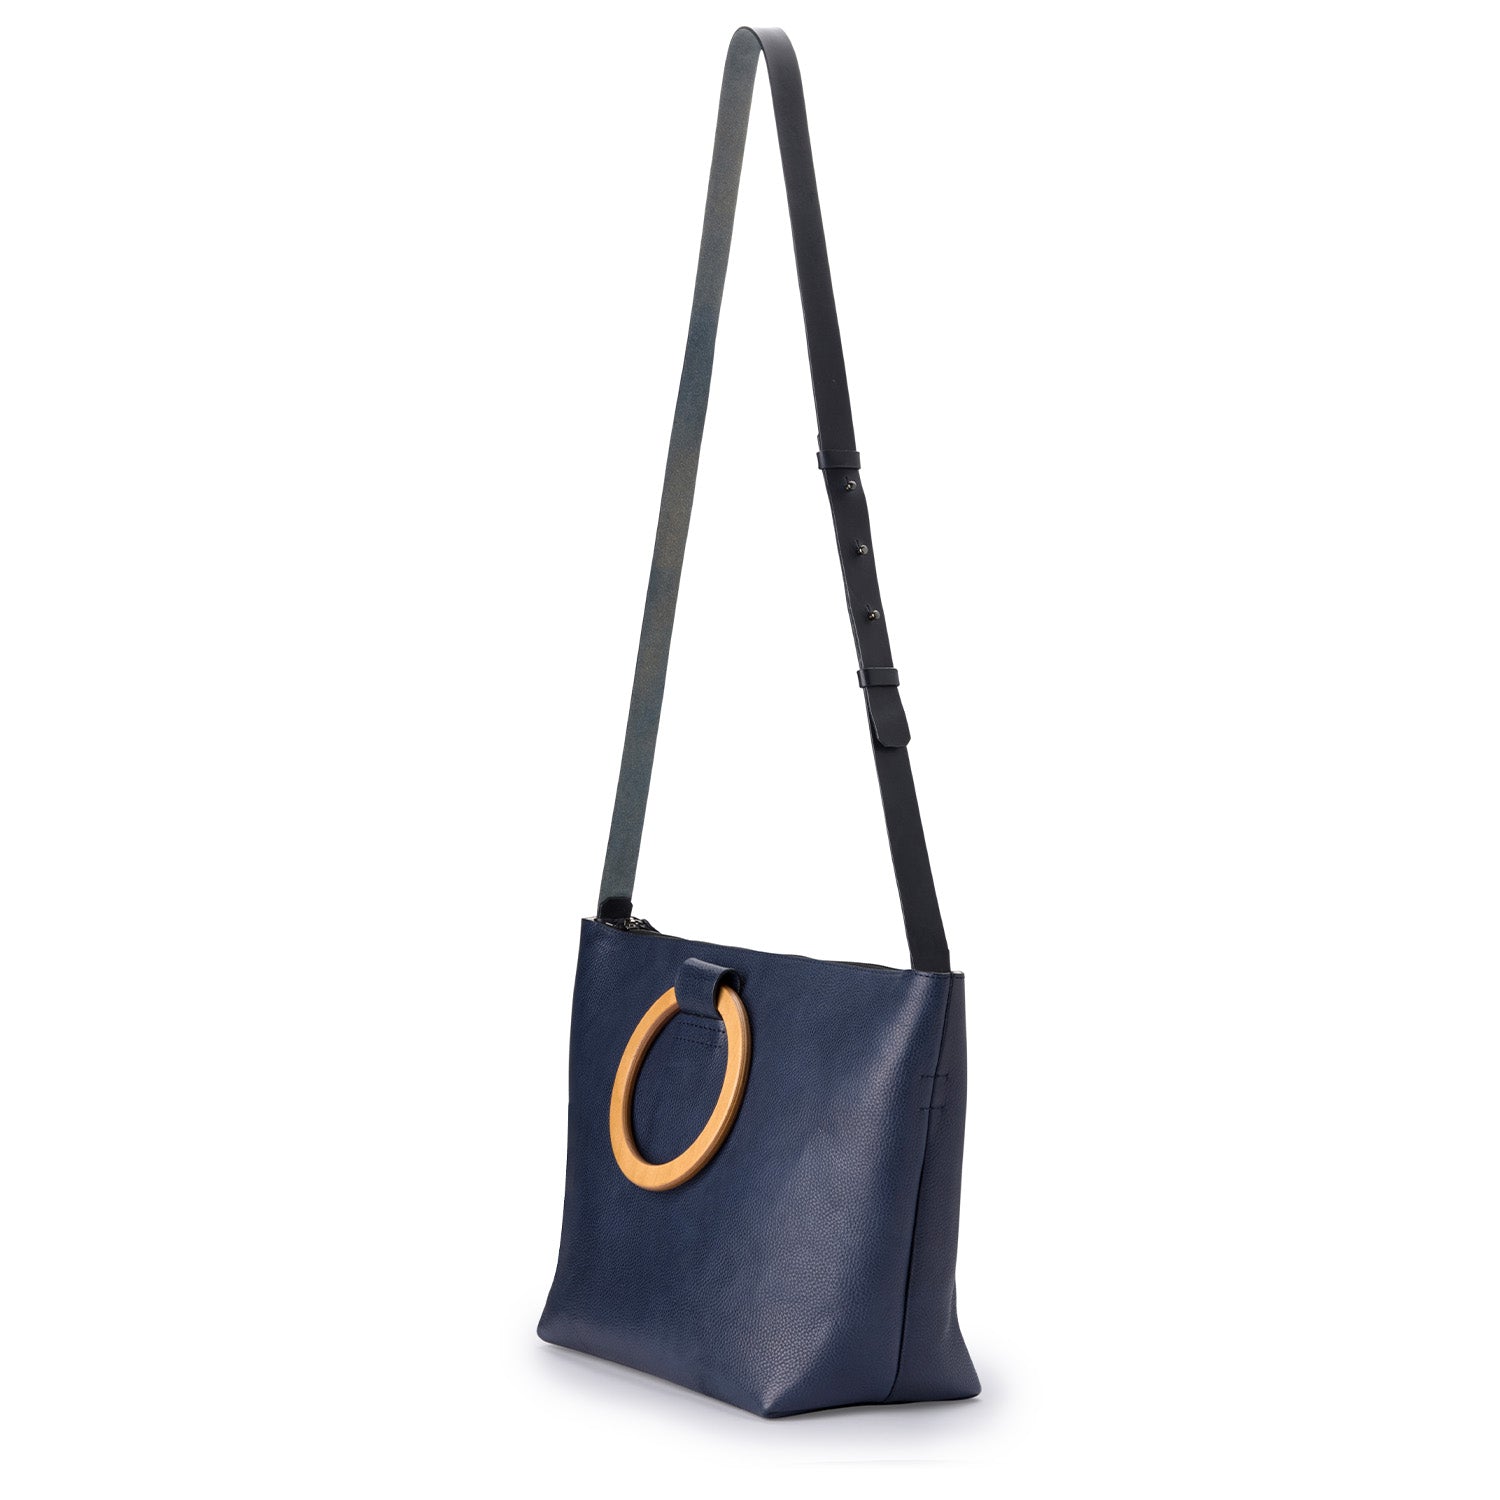 BÉIS 'The East To West Tote' in Black - Recycled Travel Tote Bag